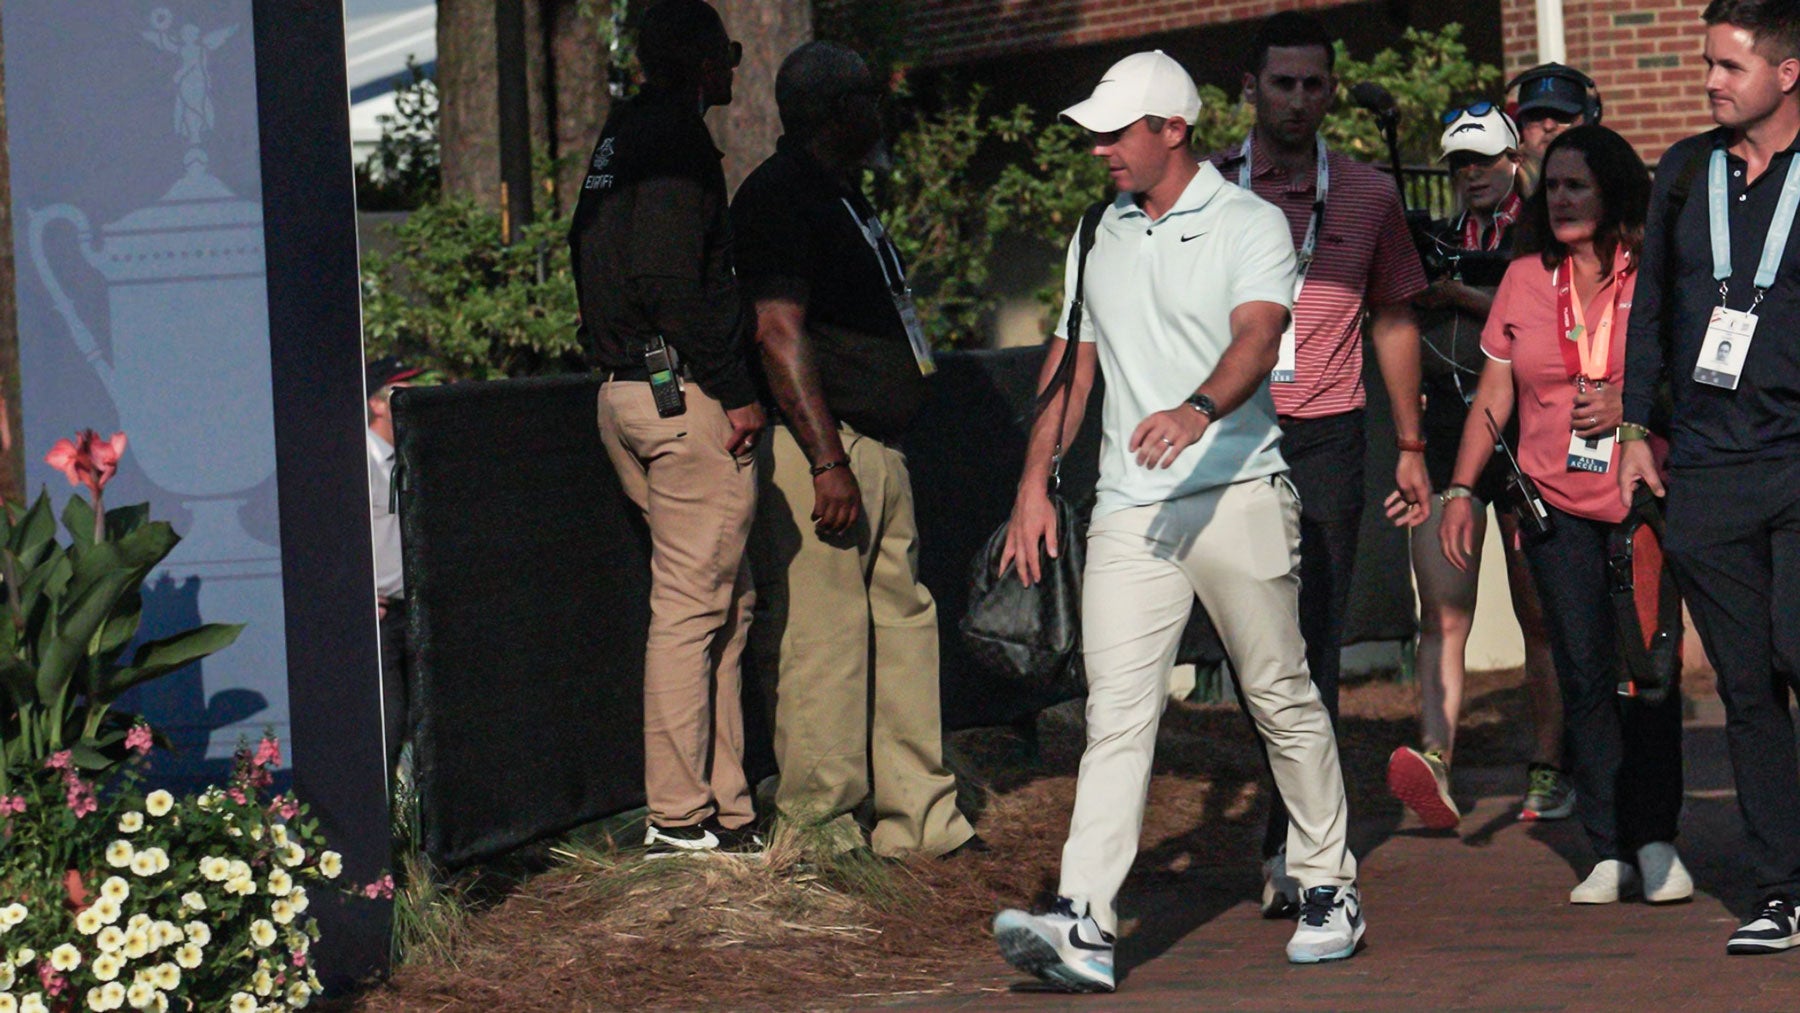 Rory mcilroy leaving the Pinehurst clubhouse after us open on sunday